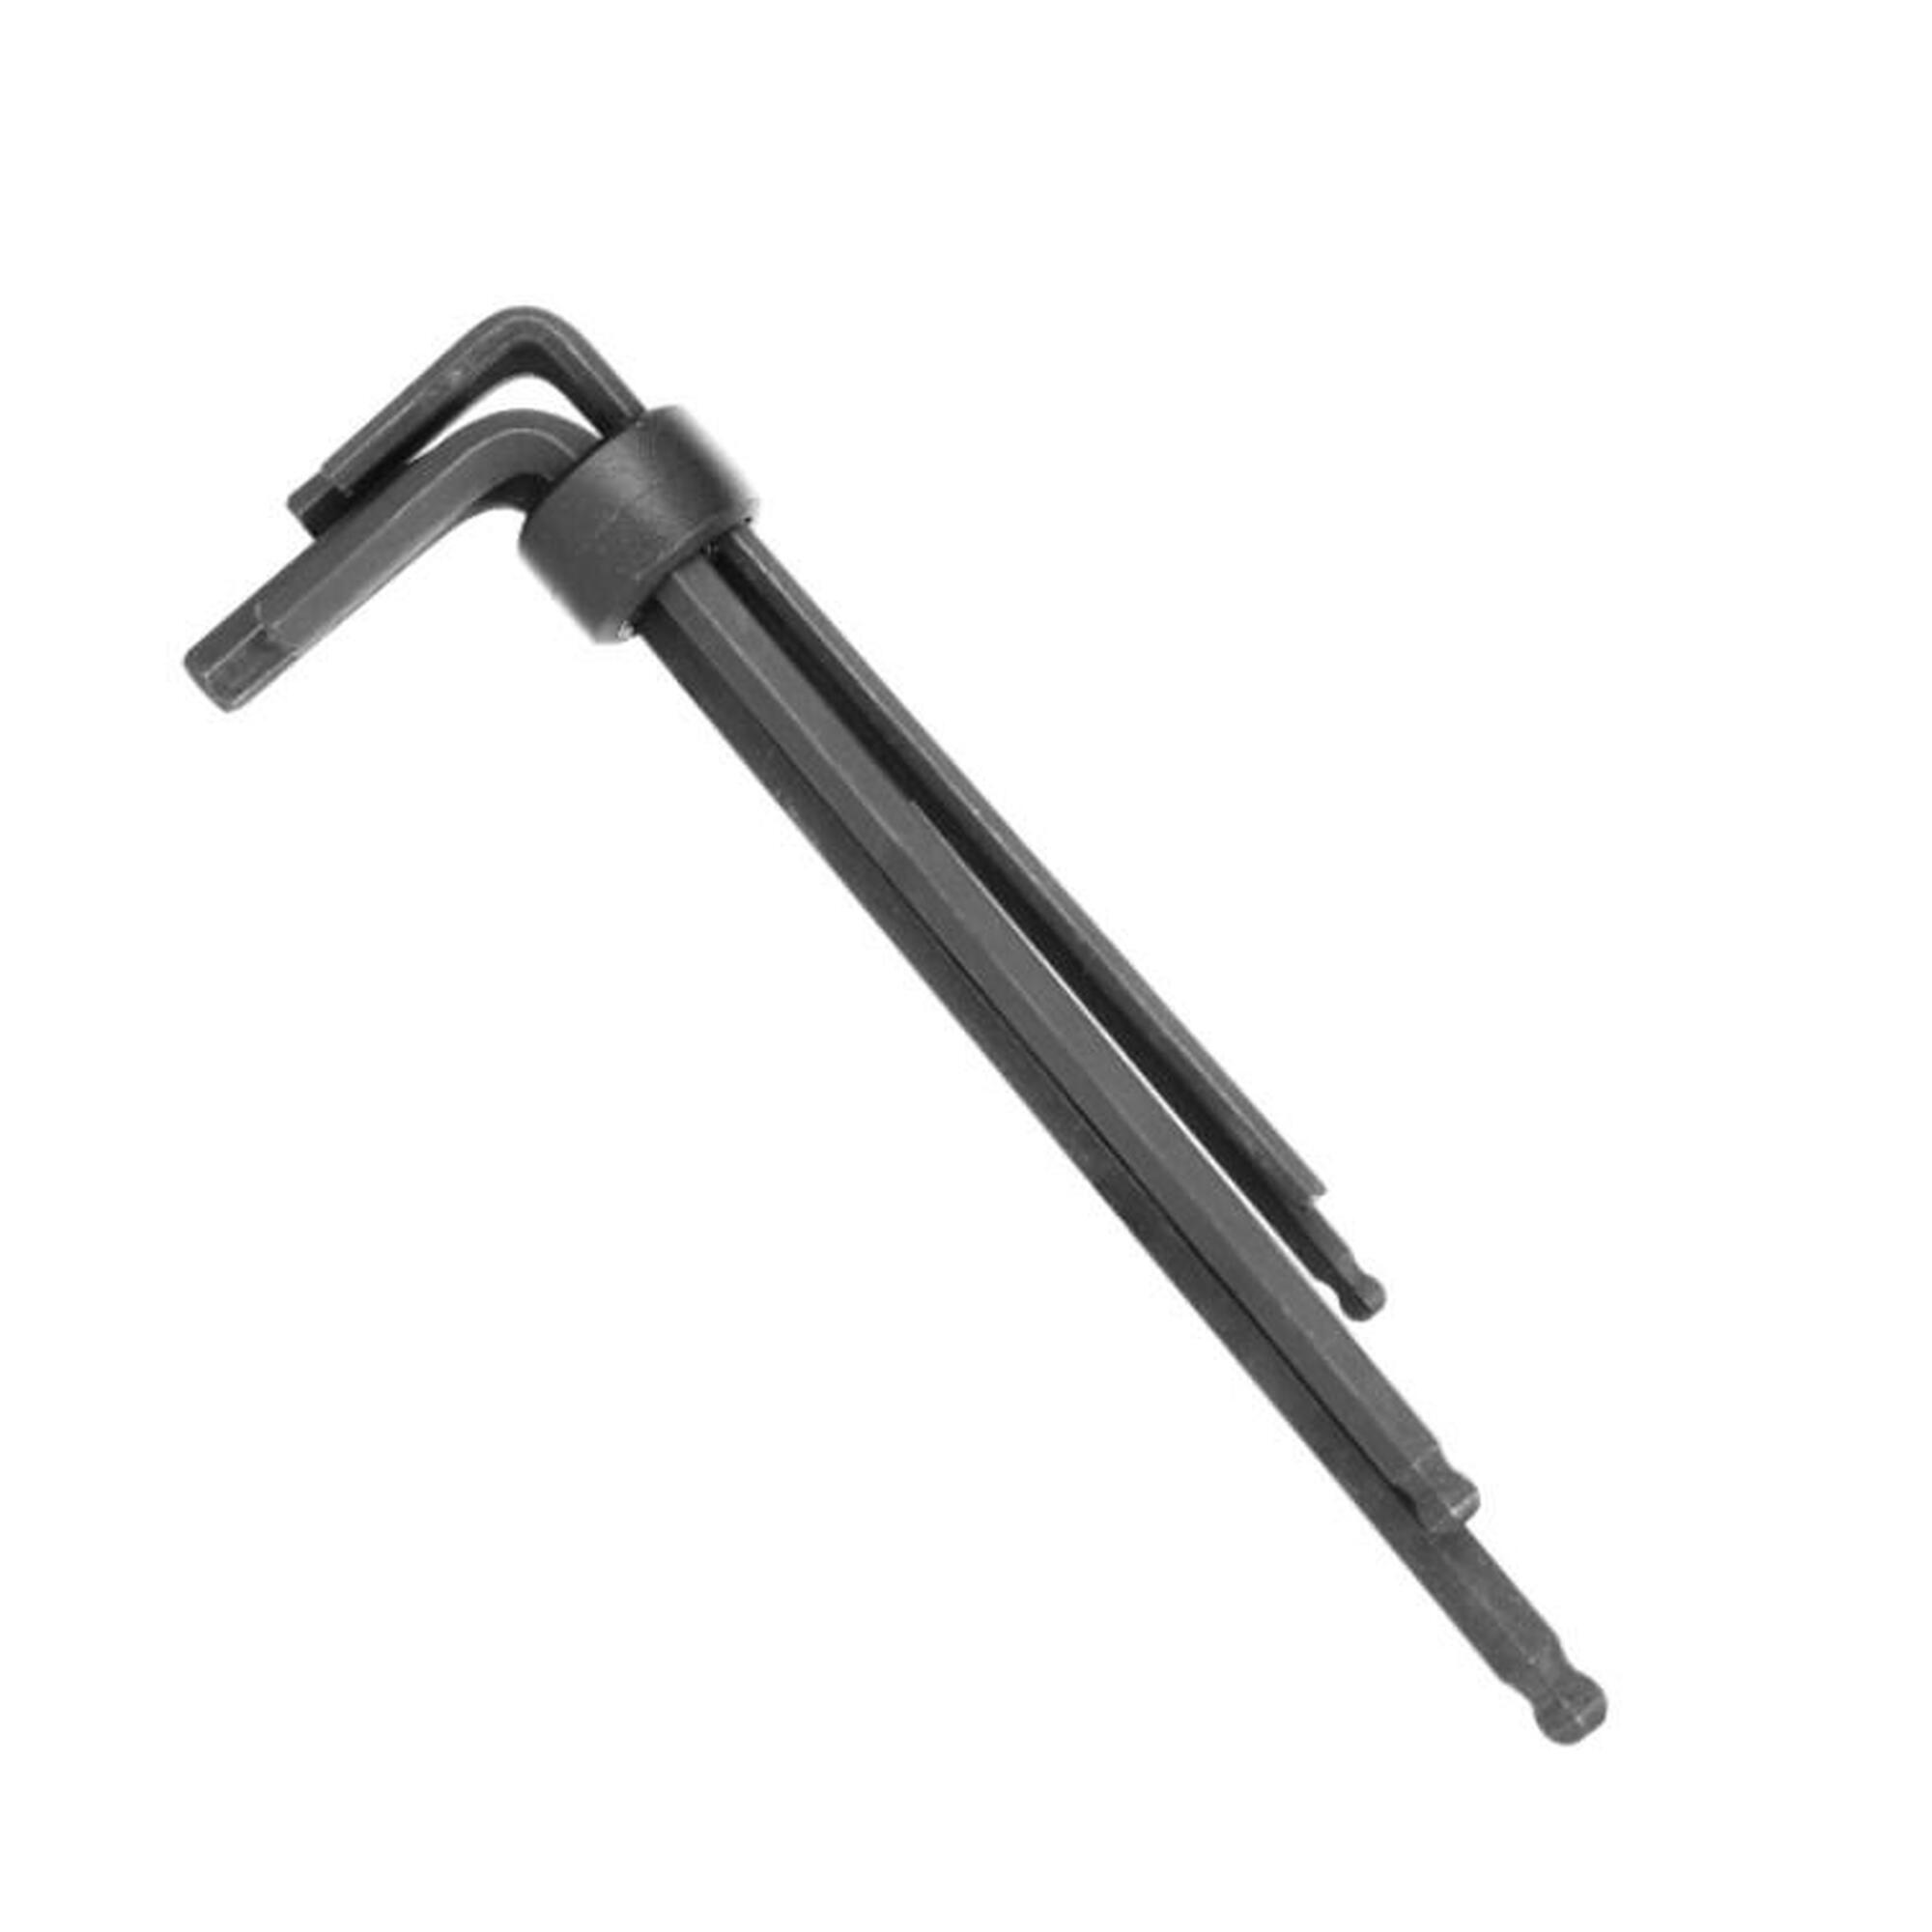 TB-TH06 4 IN 1 HEX KEY WRENCH SET